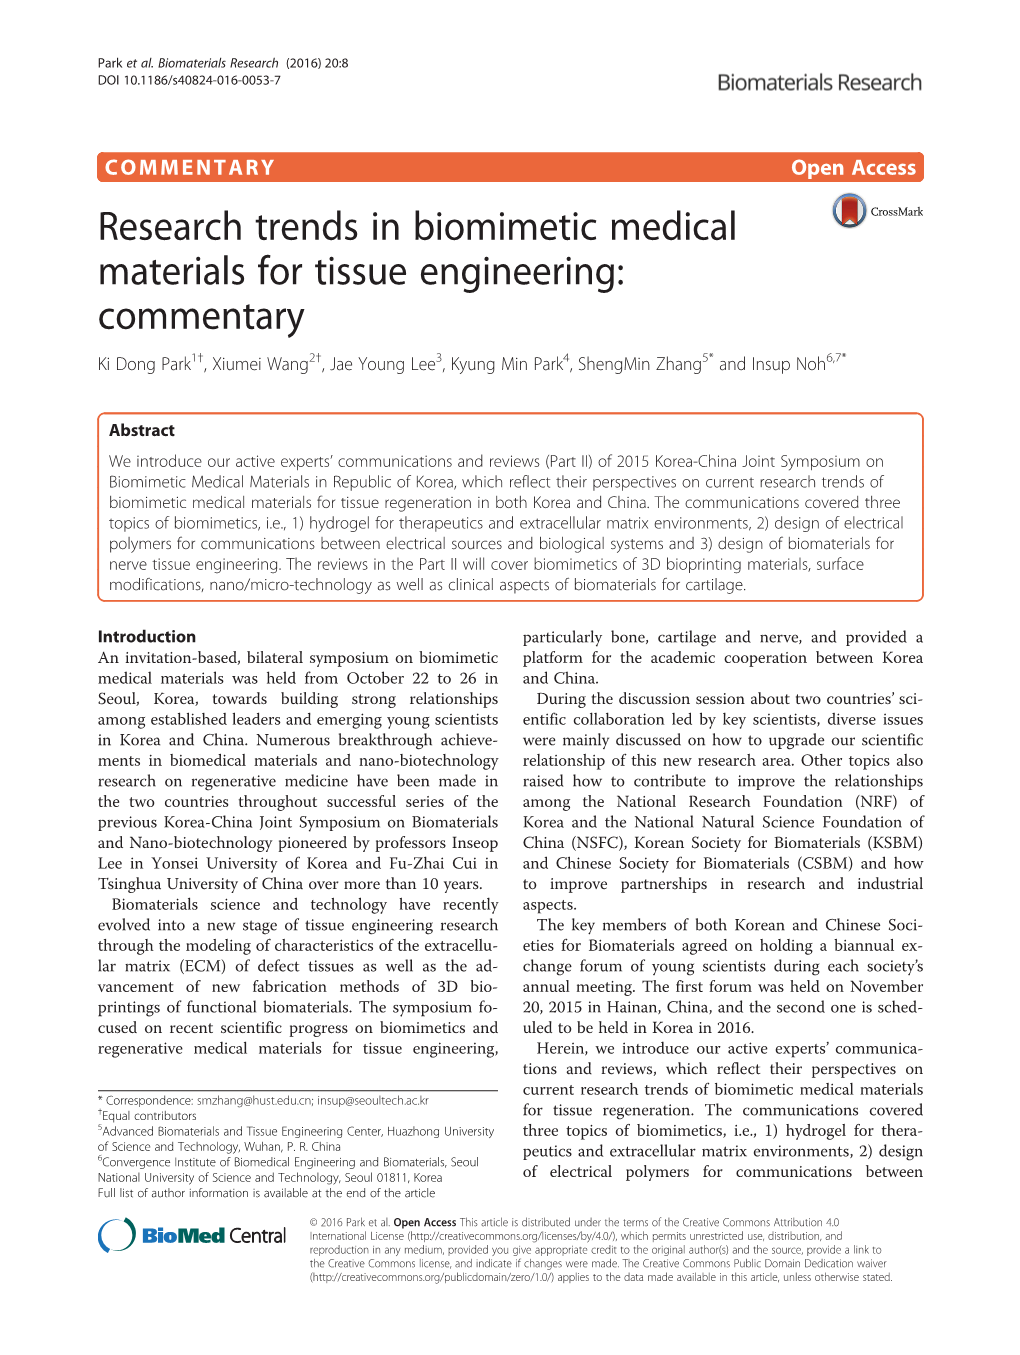 Research Trends in Biomimetic Medical Materials for Tissue Engineering: Commentary